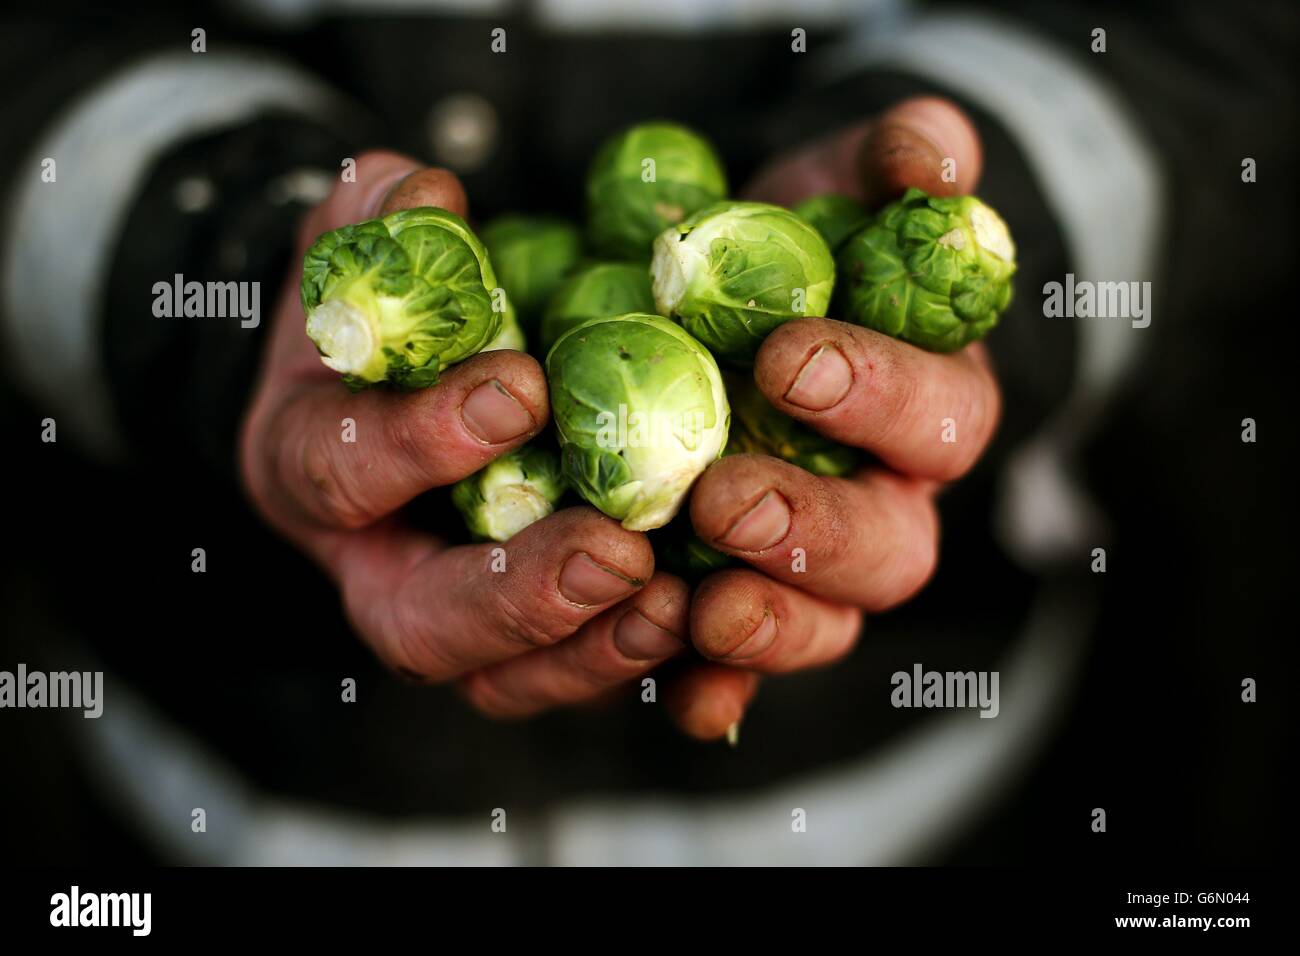 Brussels sprouts, grown on the Weldon family farm in Balheary, Co. Dublin, are being prepared for supermarkets to sell over Christmas. Stock Photo